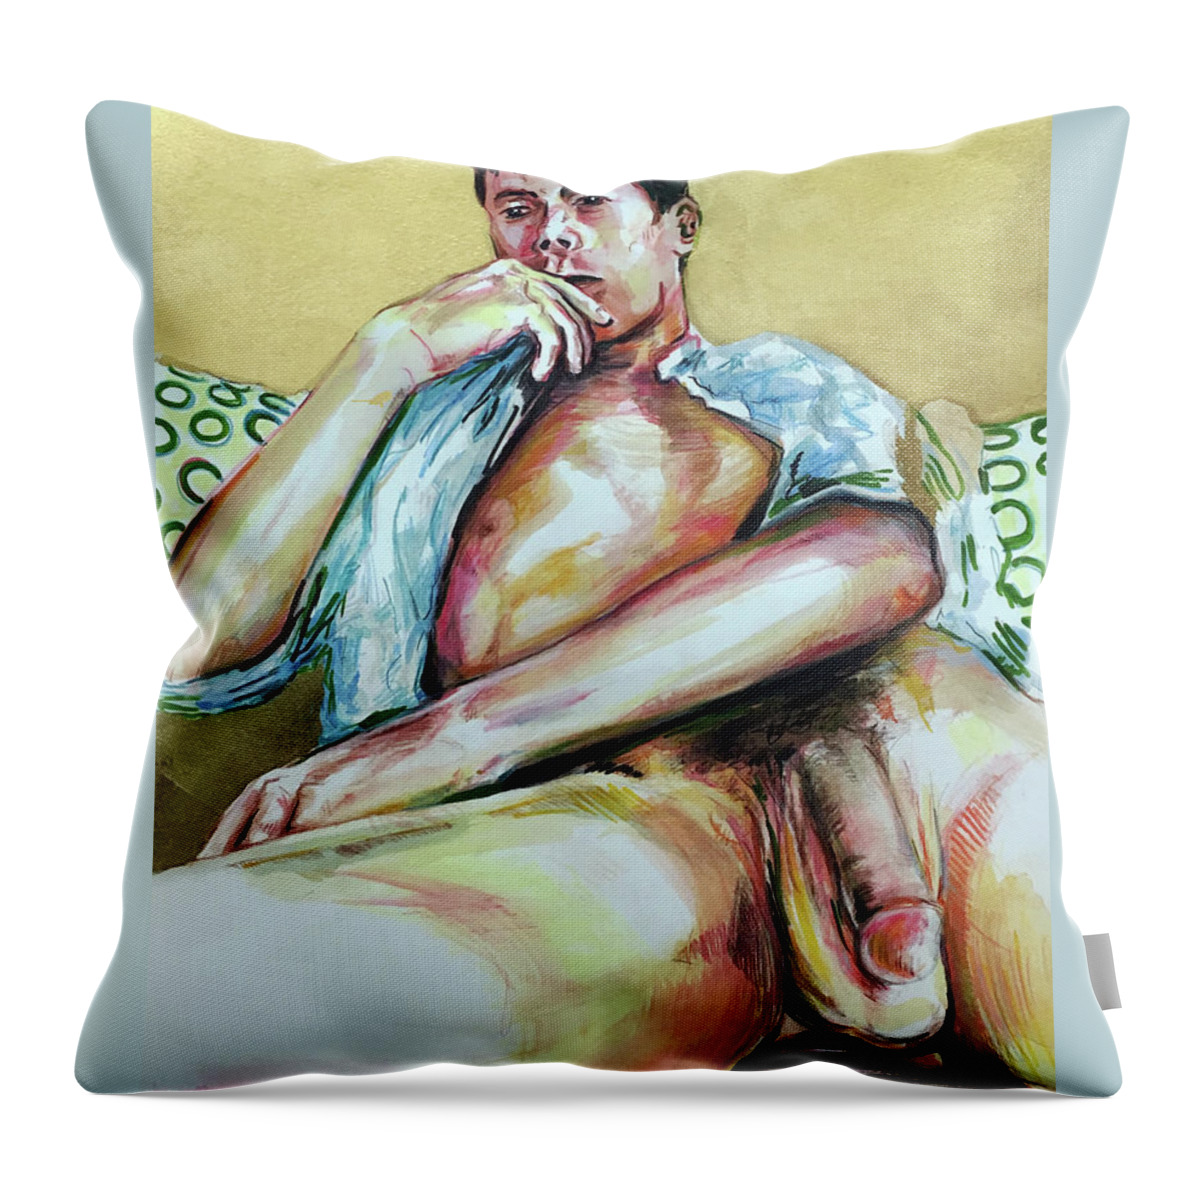 Mormon Throw Pillow featuring the painting All American Boy by Rene Capone